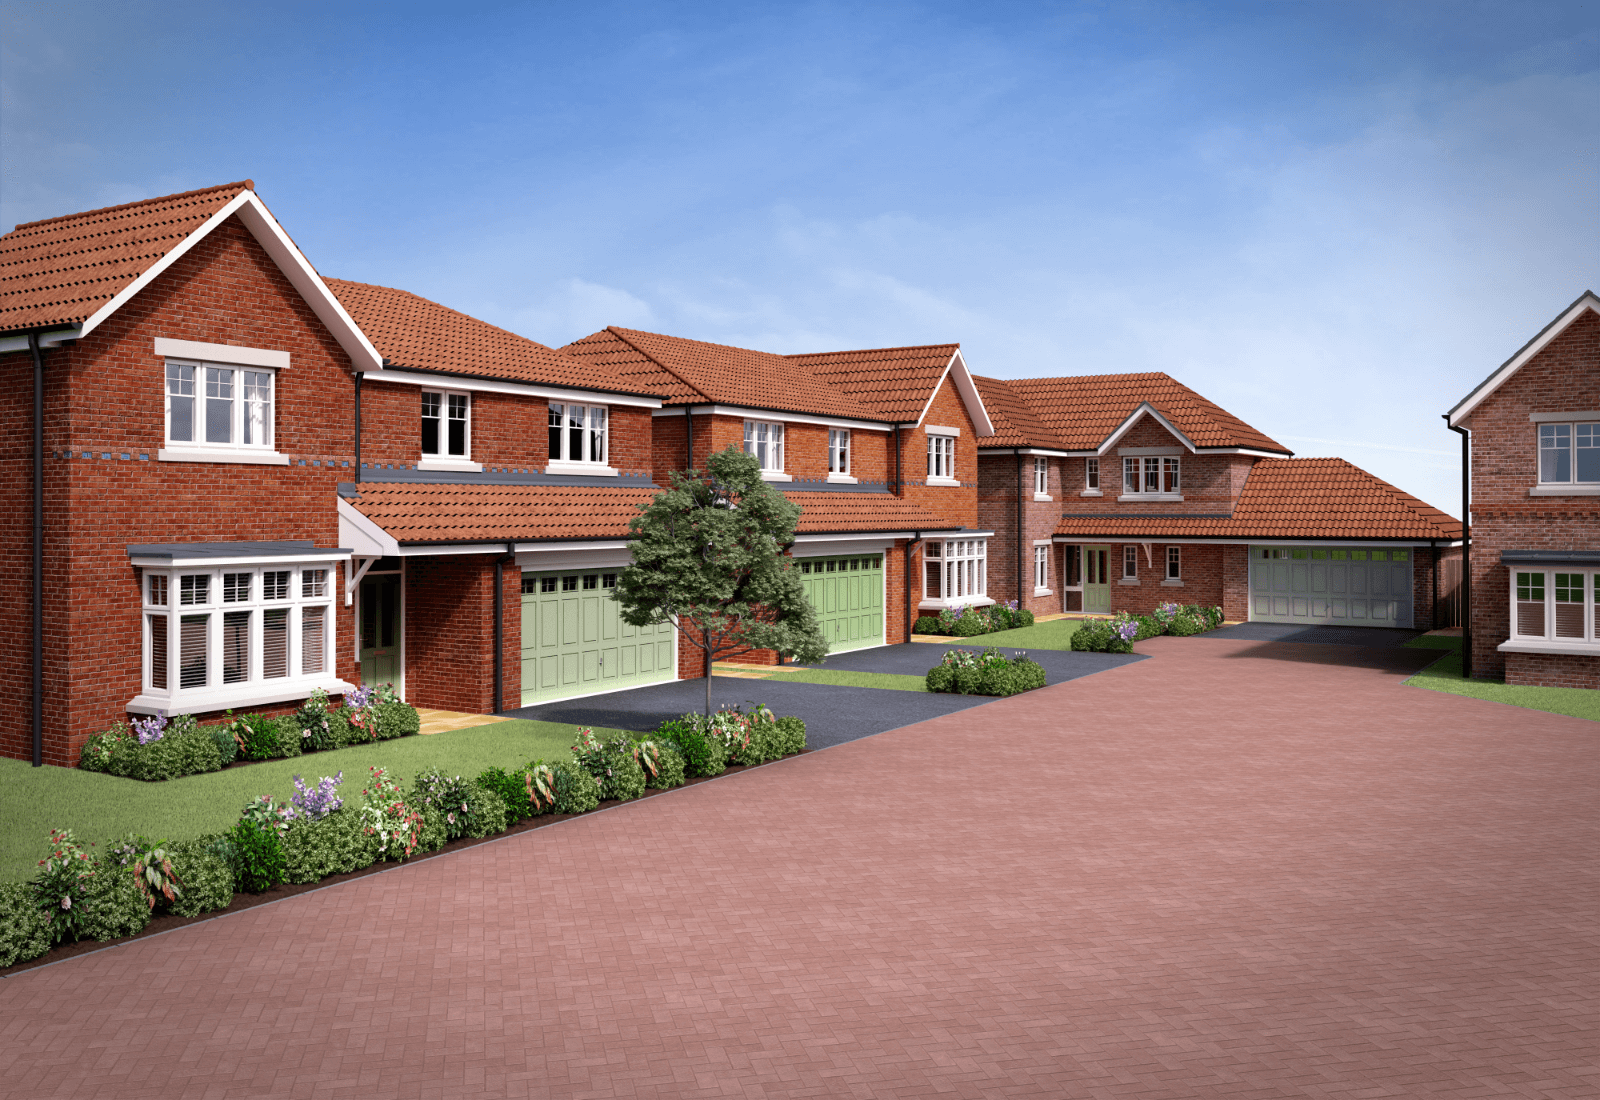 Contact Jones Homes North West Yorkshire Southern Fylde